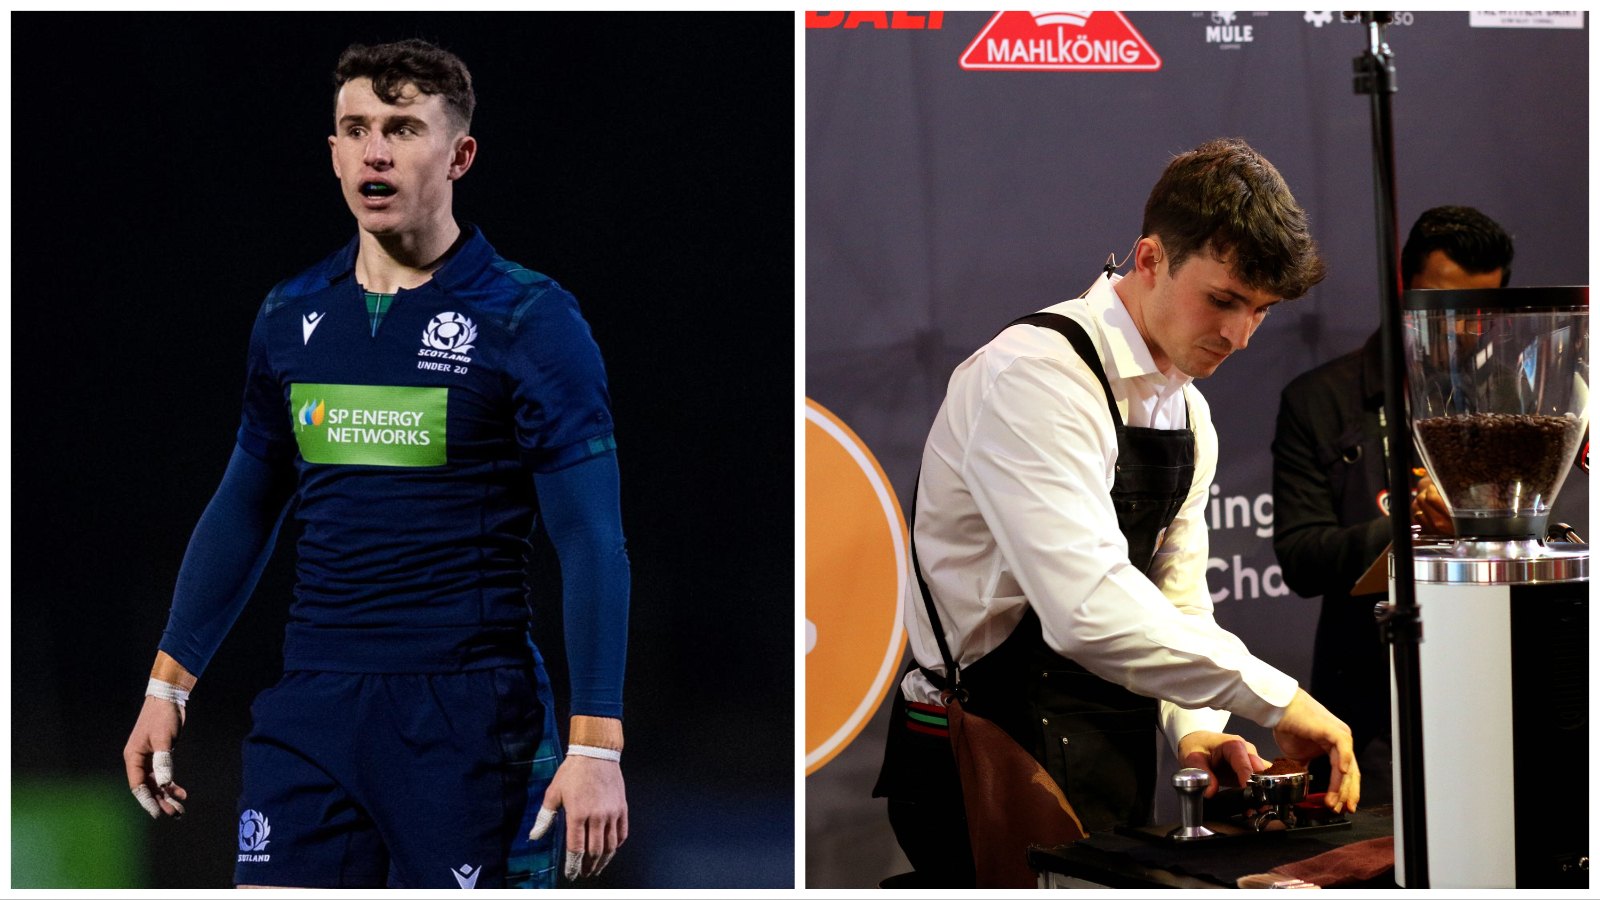 Kyle McGhie playing for Scotland under 20s and at the Scottish Heats of the barista championships.